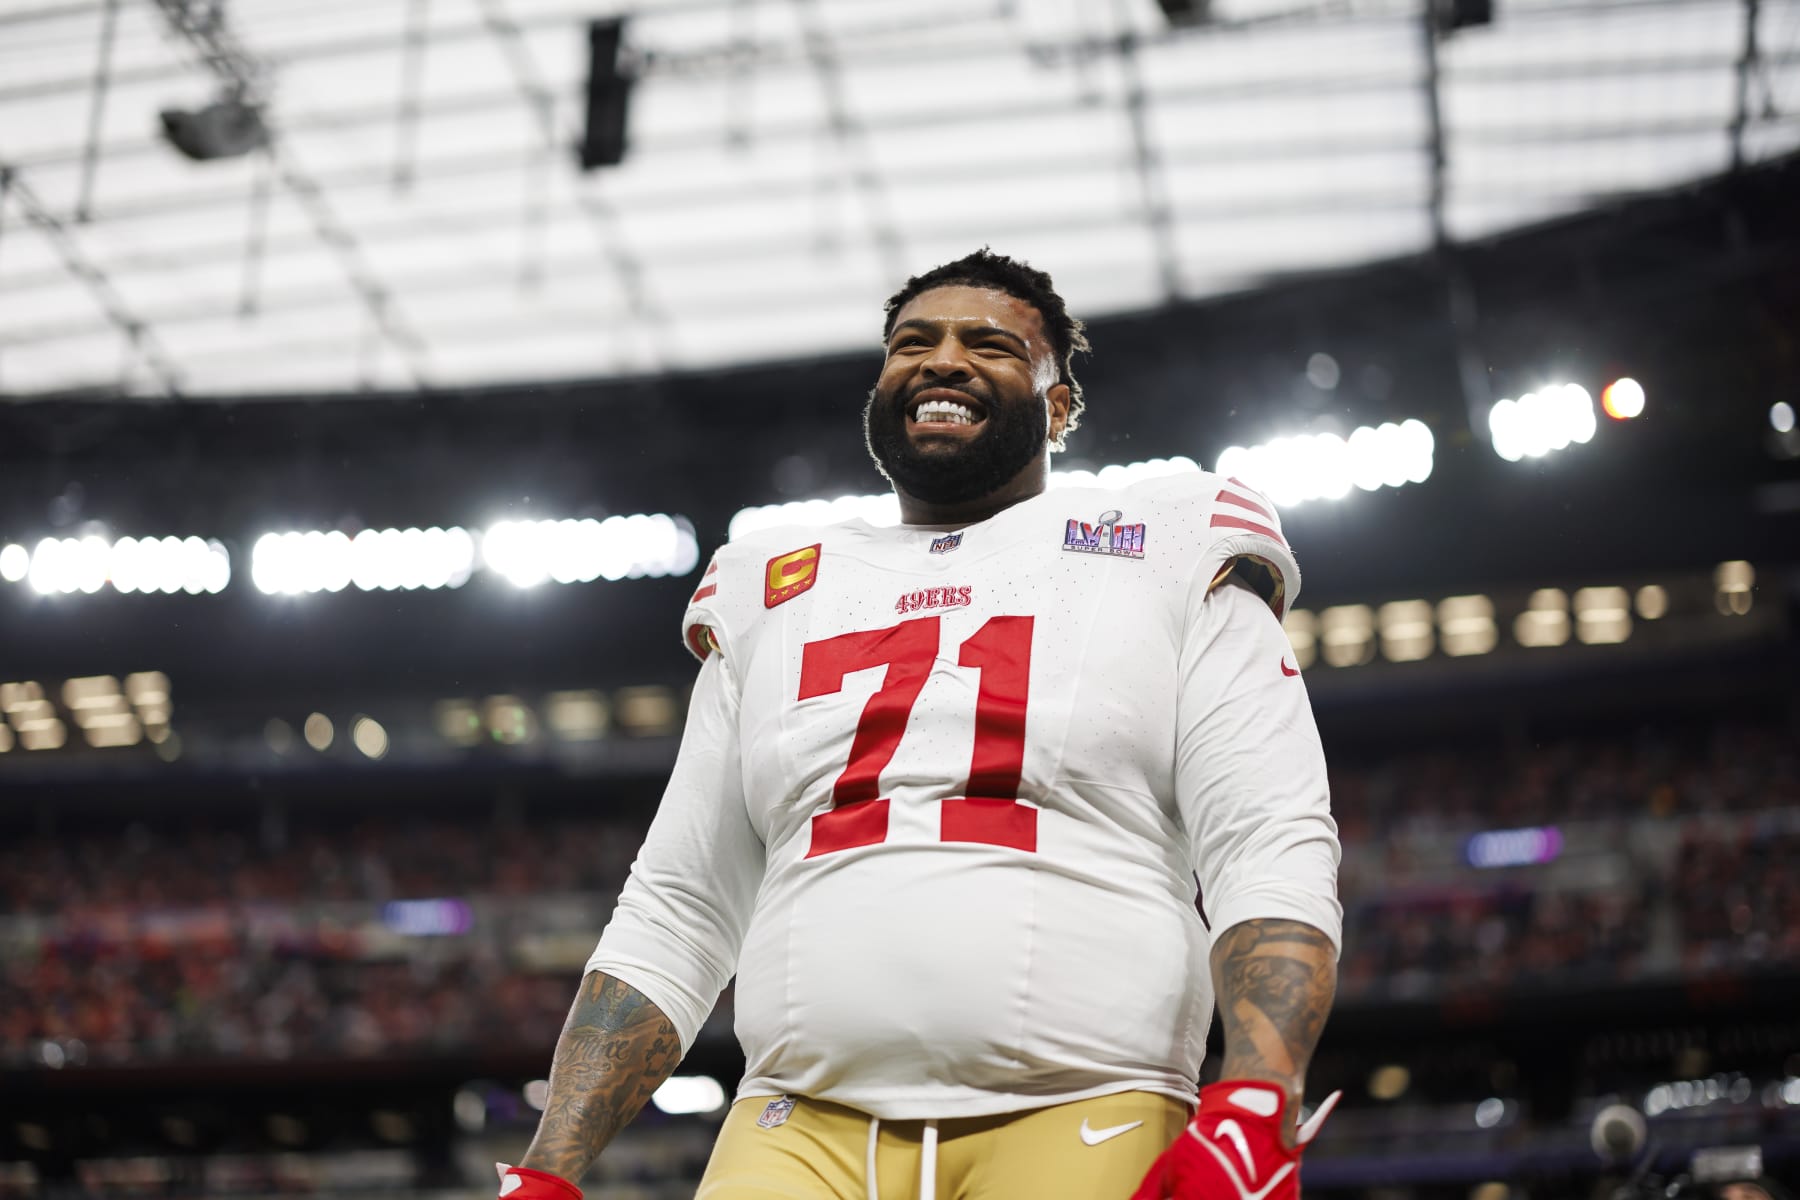 Trent Williams, Penei Sewell, Laremy Tunsil and Top NFL OT Rankings by Coaches, Execs